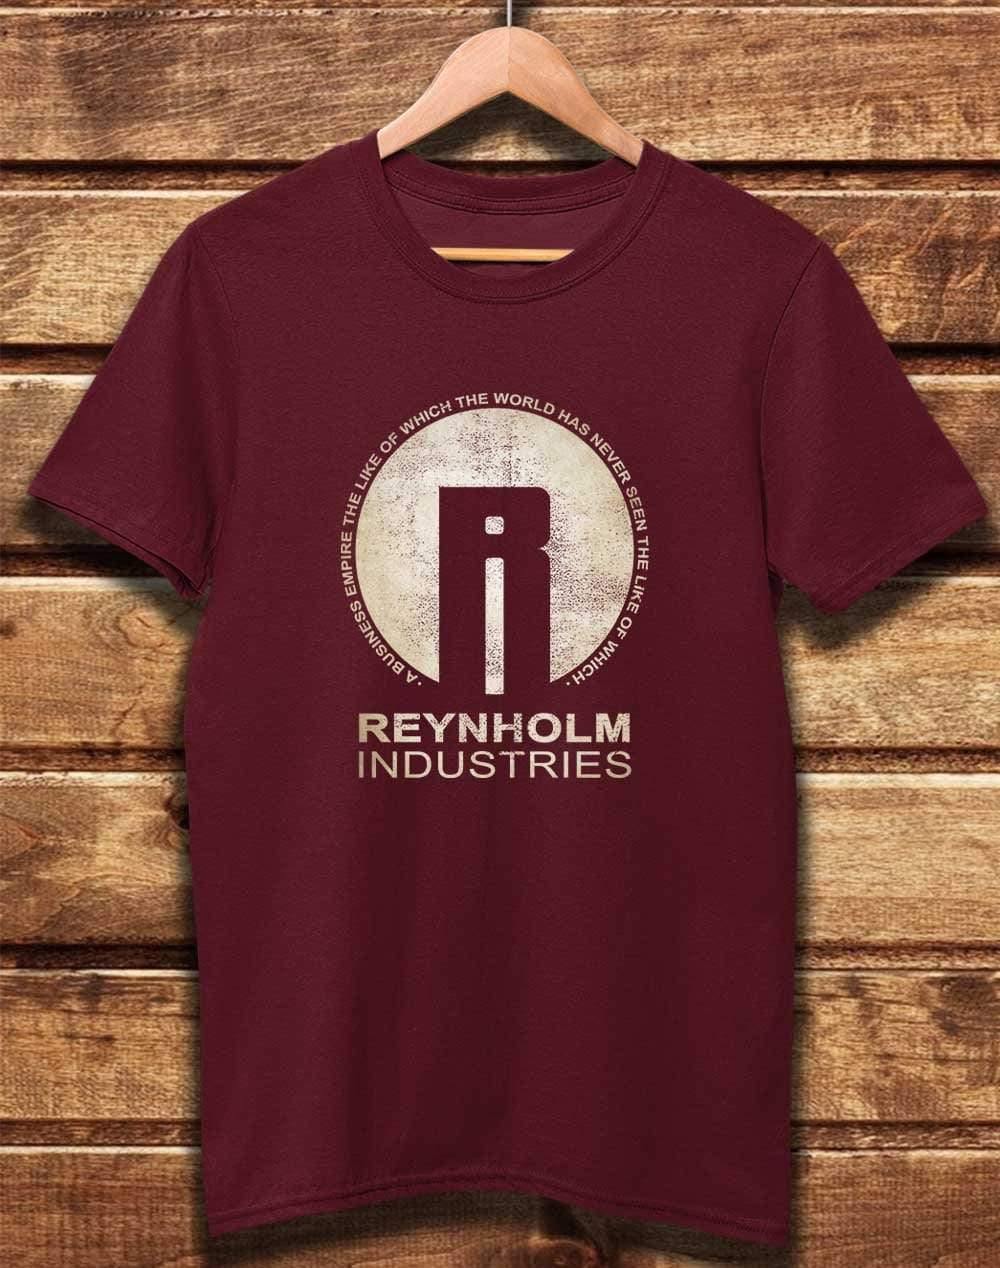 DELUXE Reynholm Industries Organic Cotton T-Shirt XS / Burgundy  - Off World Tees